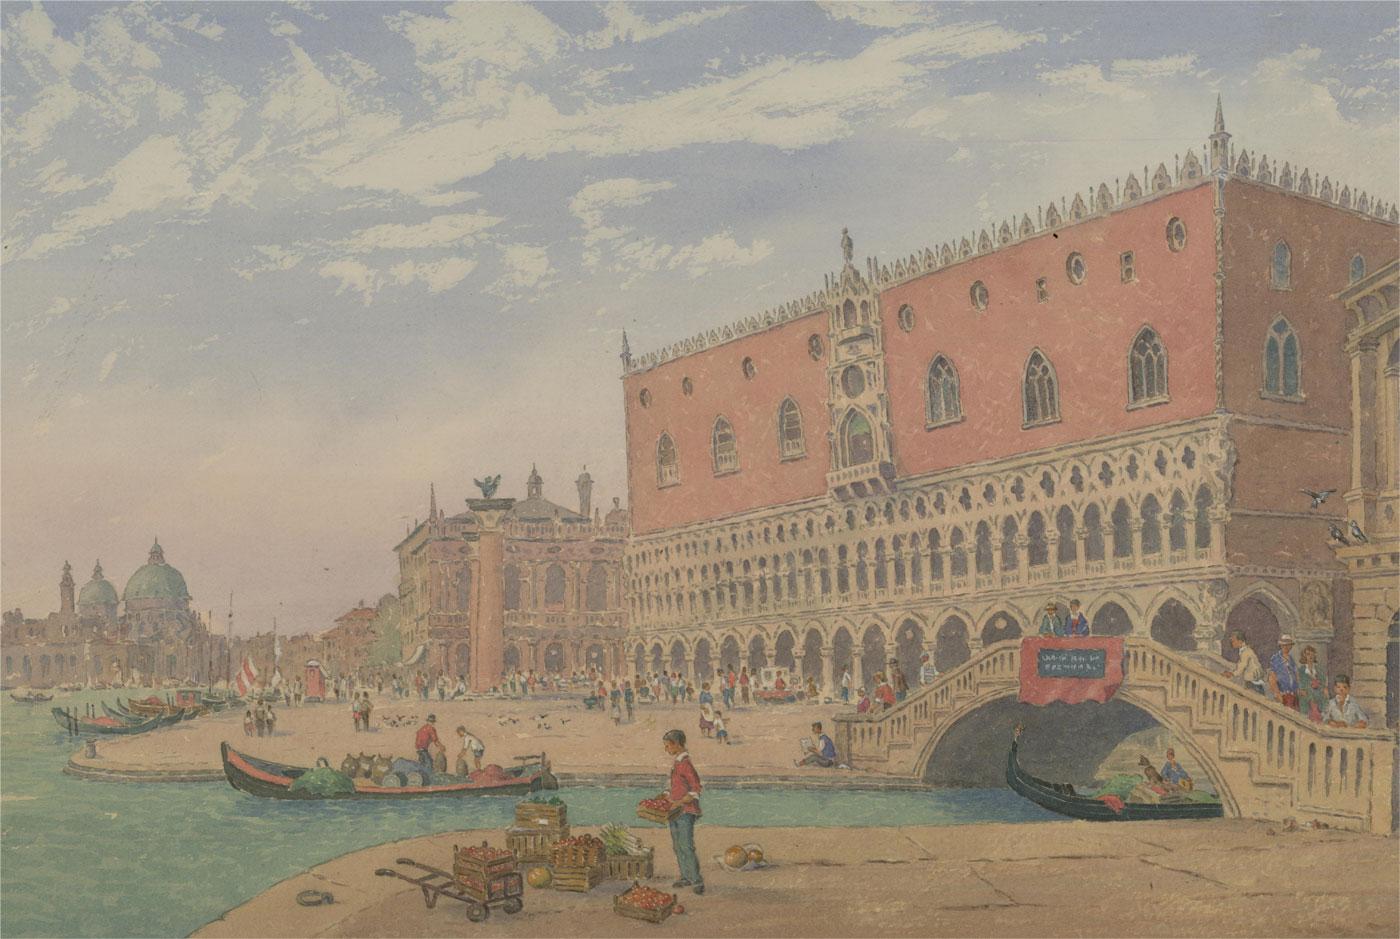 A striking watercolour depiction of the Doge's Palace, Venice. The painting is on heavy wove board. On heavy wove board.
